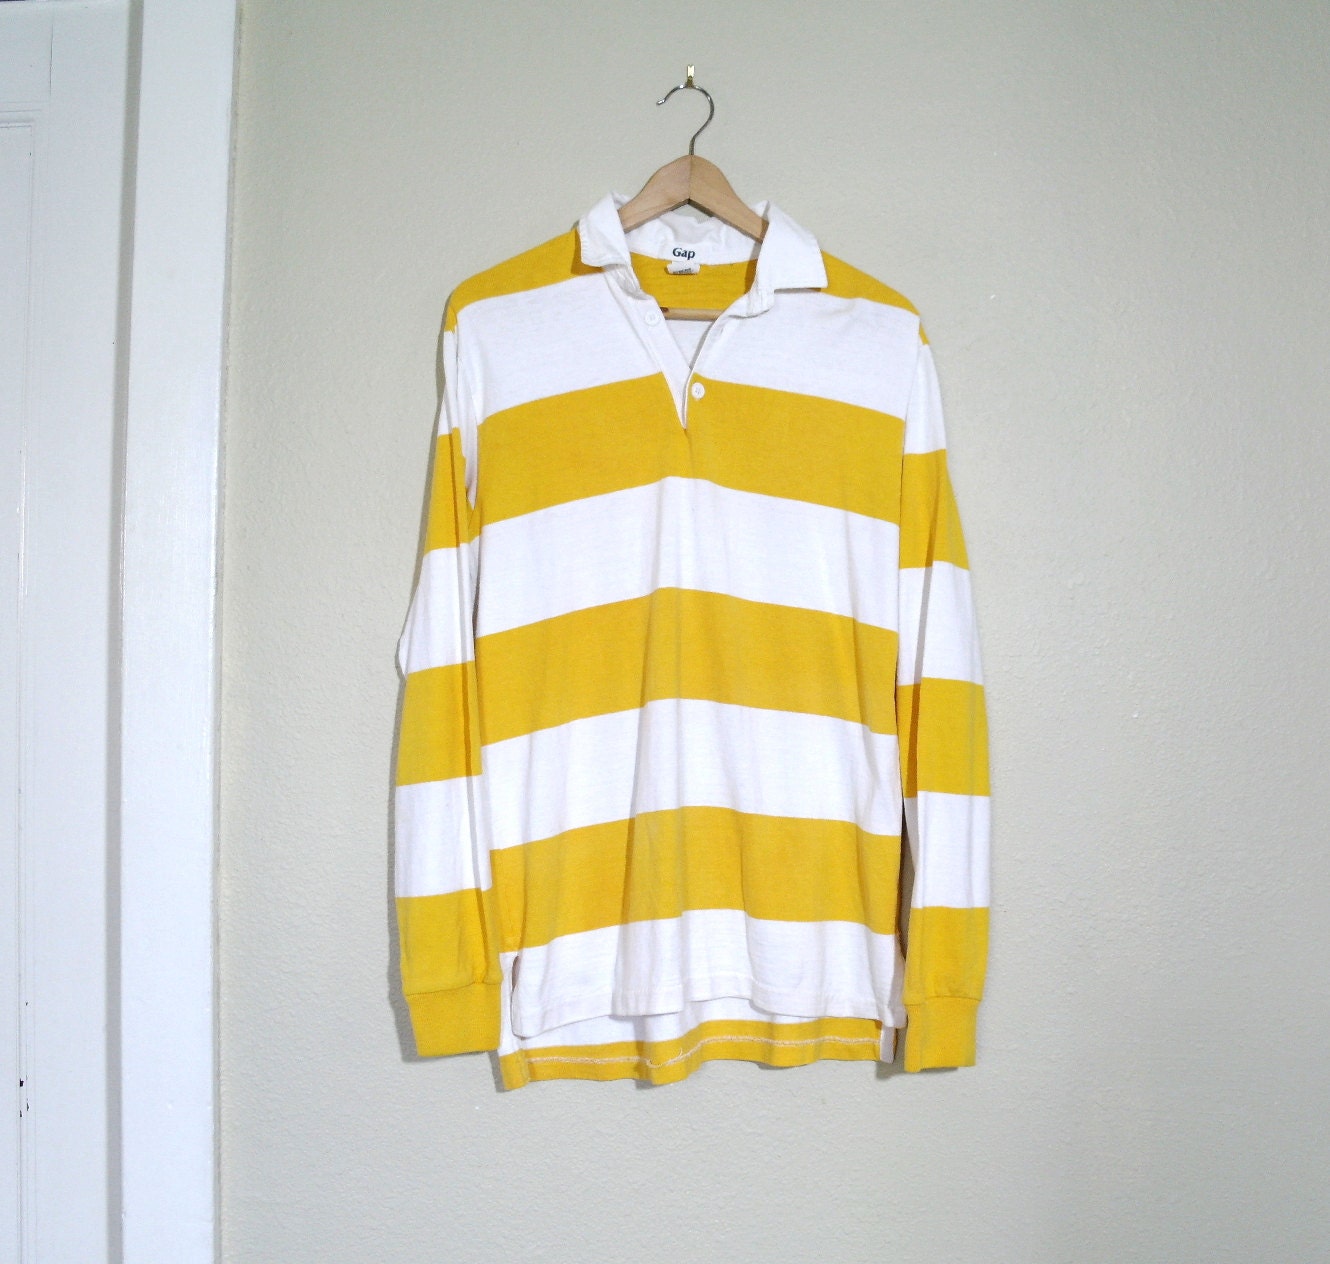 Vintage 90s Gap Shirt Rugby Shirt Yellow and White Stripe